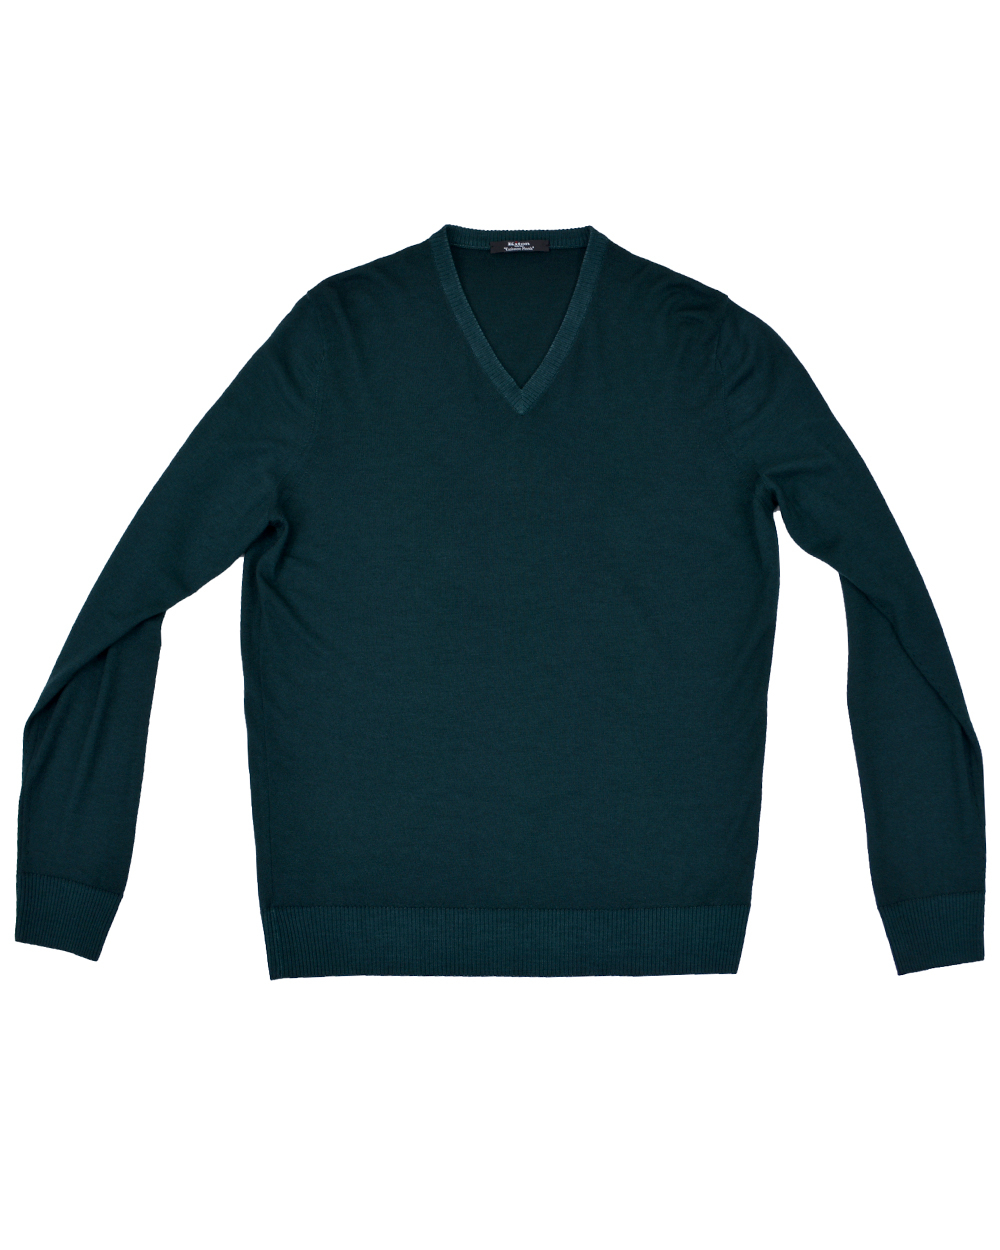 Kiton Green Cashmere Sweater in Green for Men | Lyst